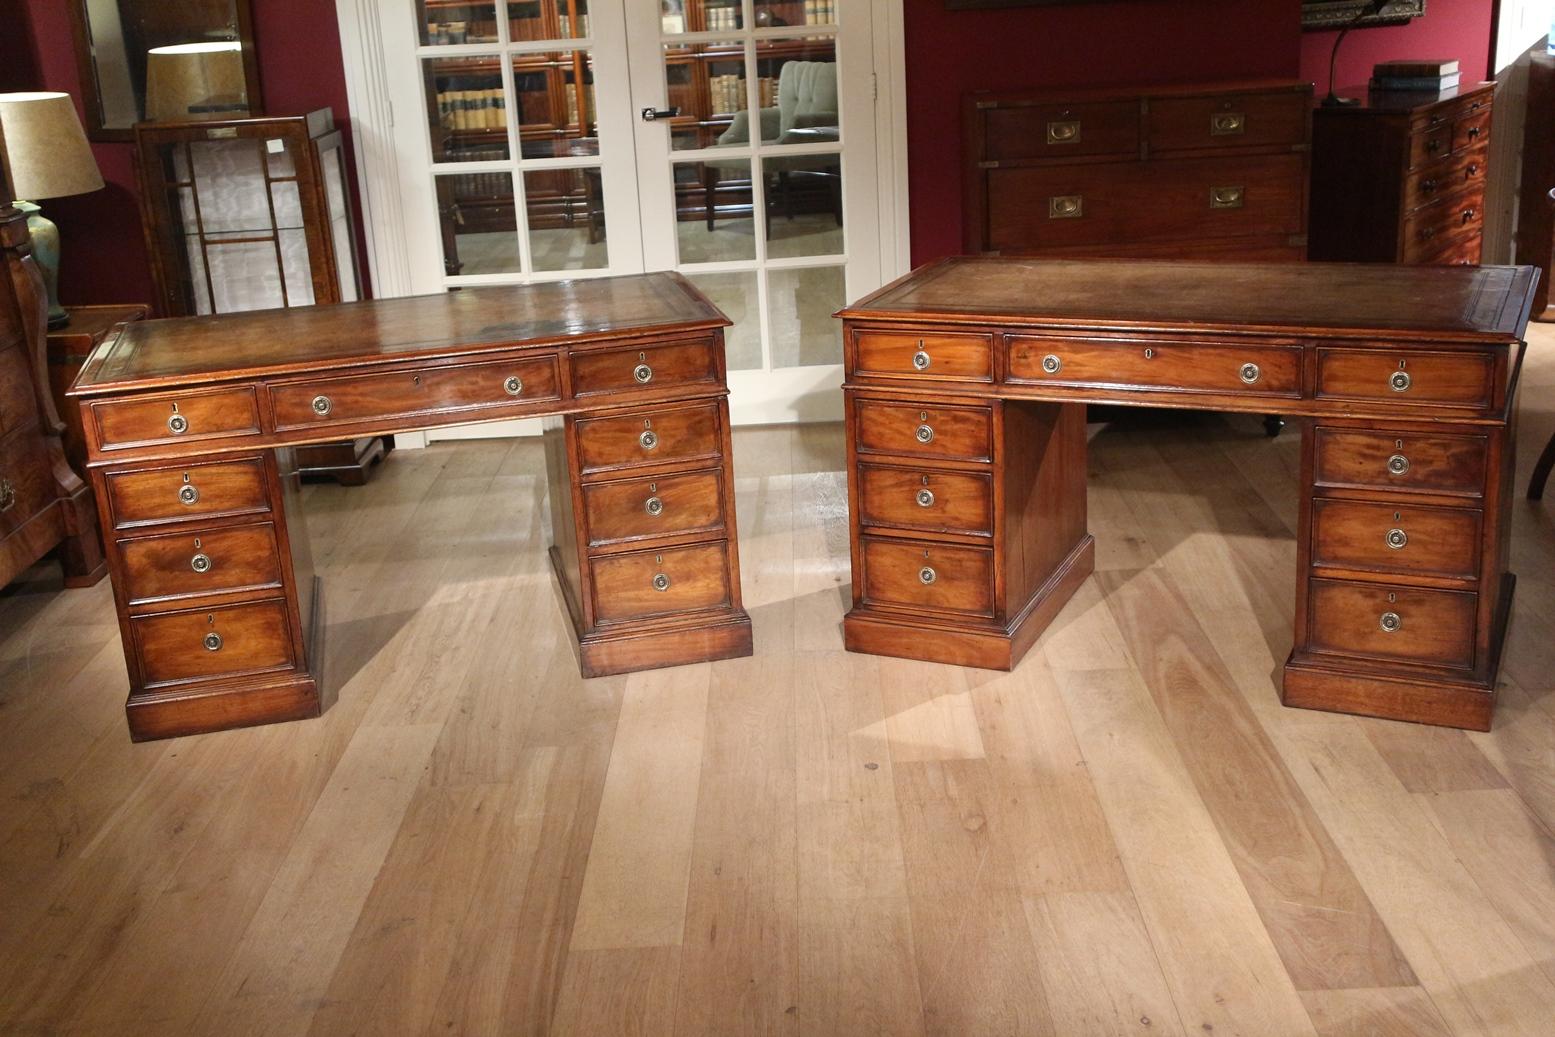 Set of antique exactly identical desks in beautiful original condition. Beautiful aged leather. The desks can be used in multiple configurations. Put together, for example, it becomes a large partner desk. Identical desks are rare. Only the height